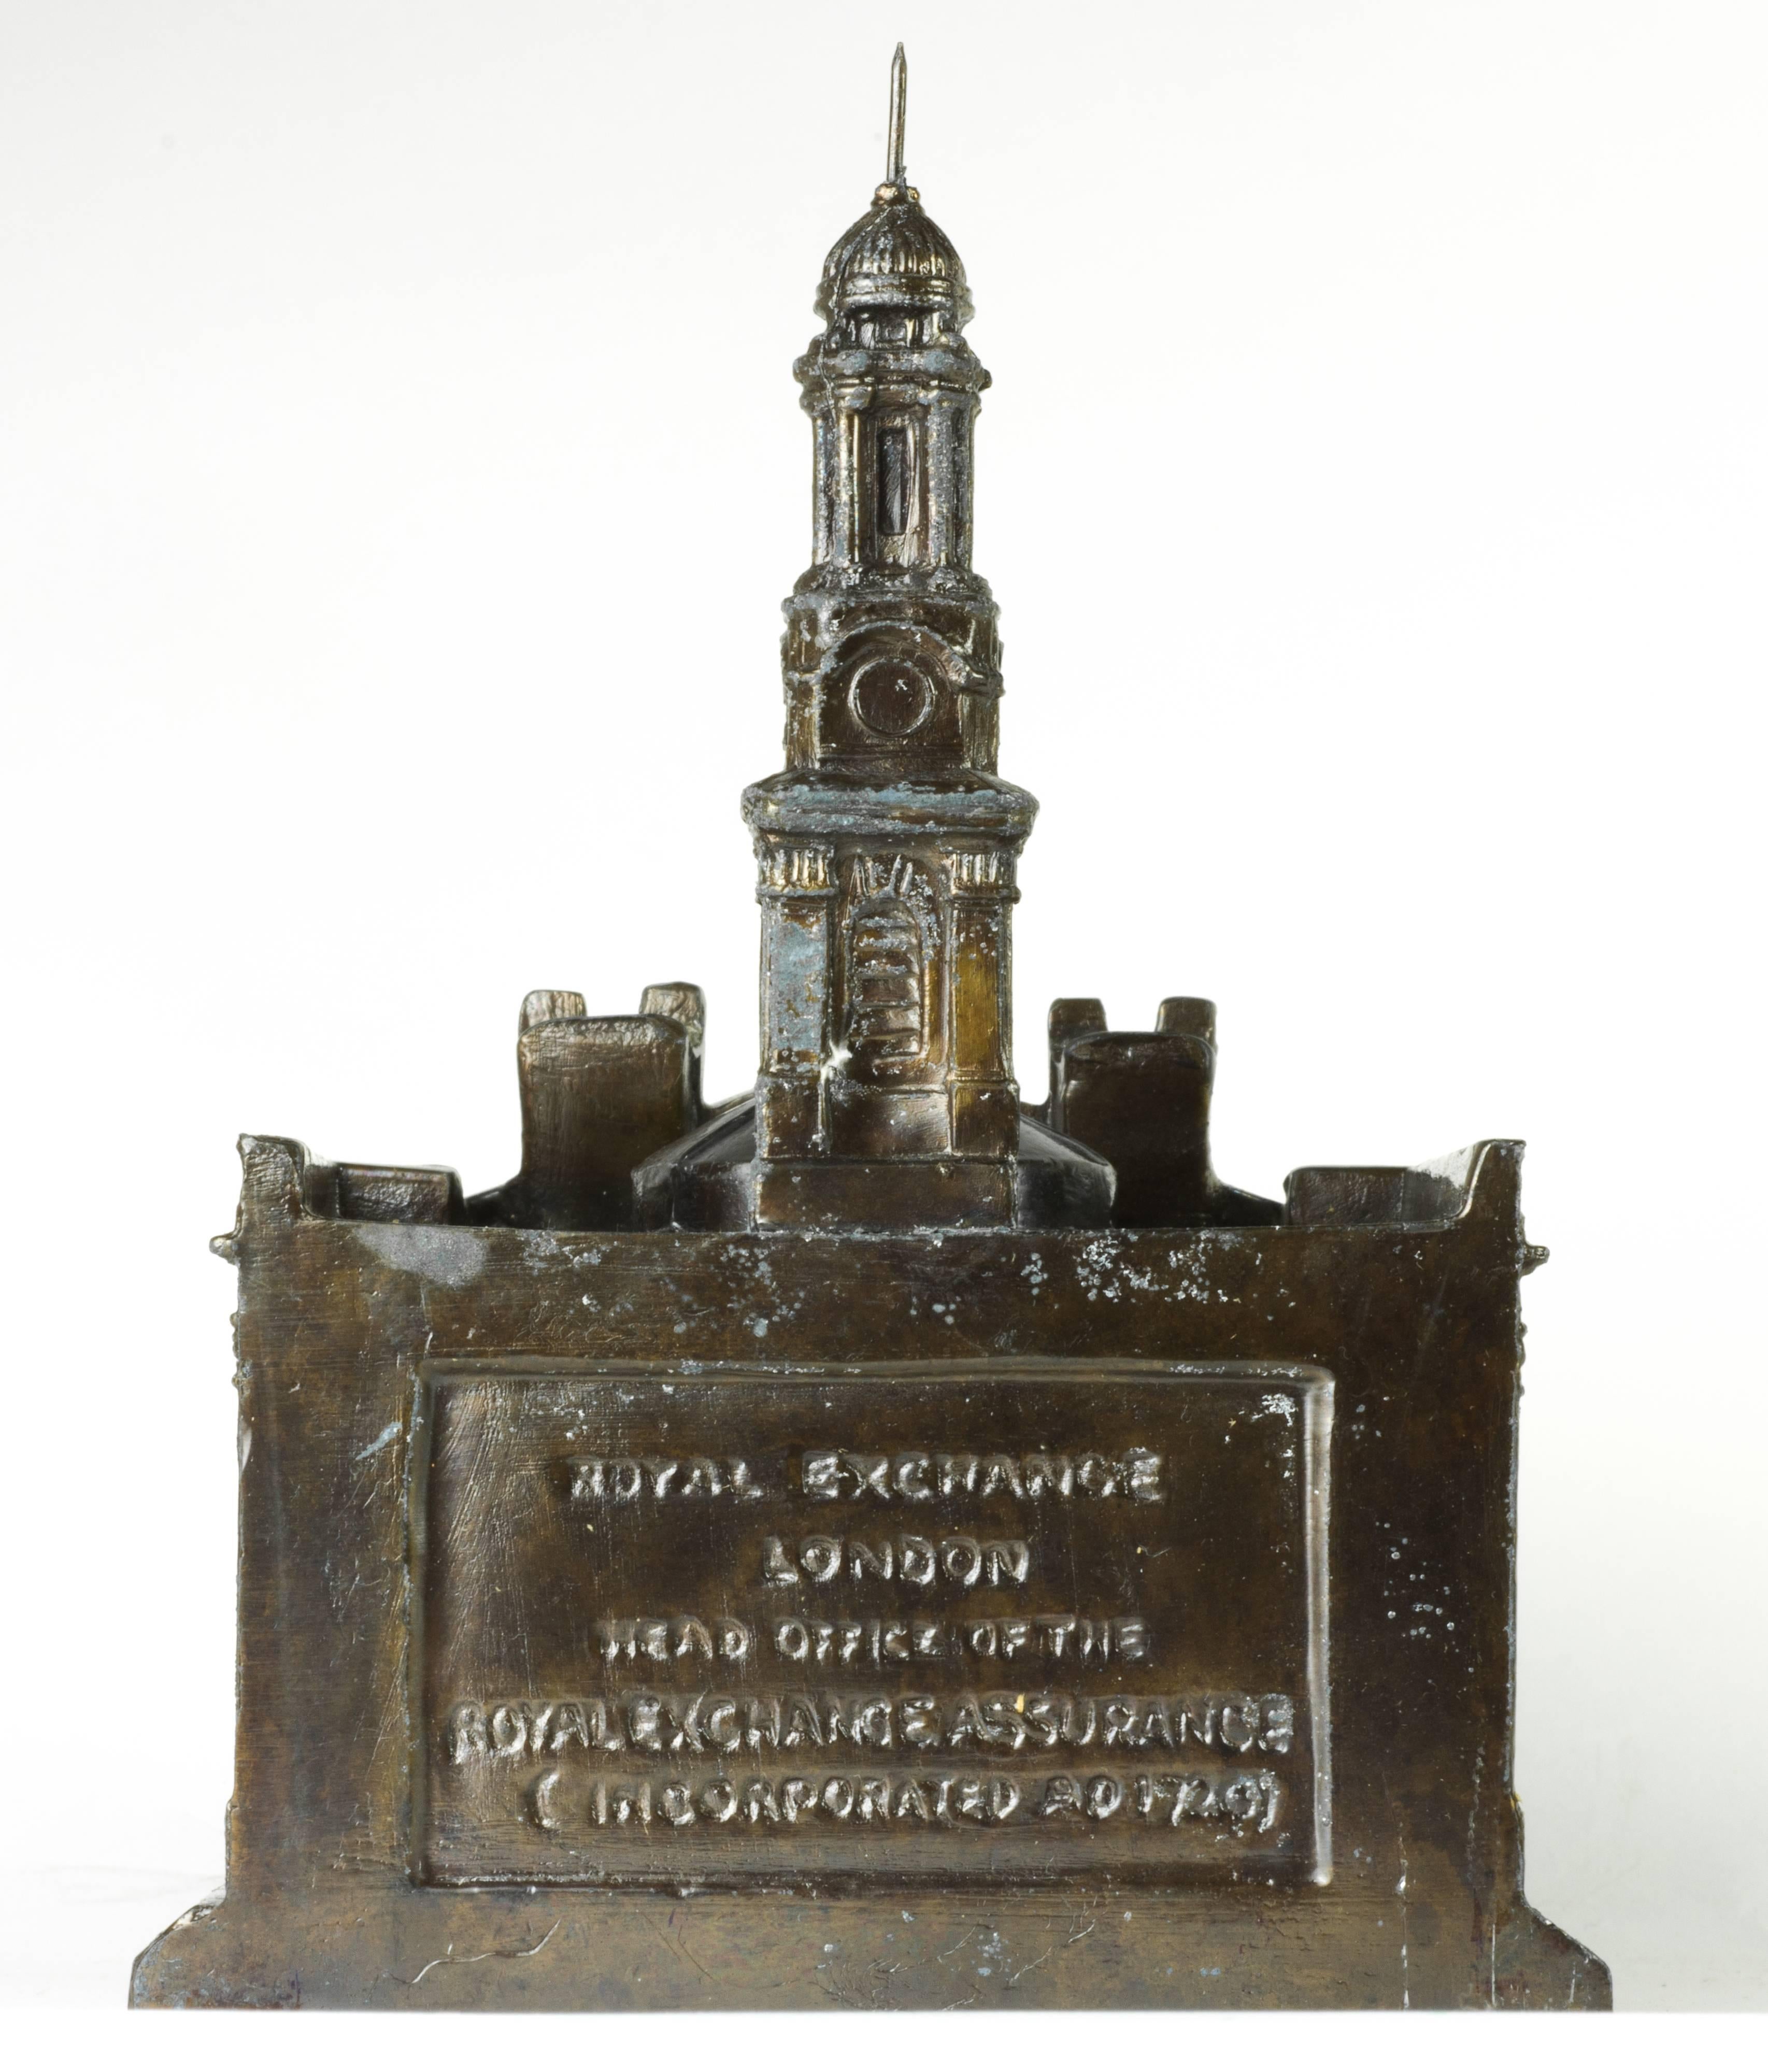 Royal Exchange Assurance, London, 1930s architectural souvenir inkwell.

From Piraneseum's Attic, this 5 1/2